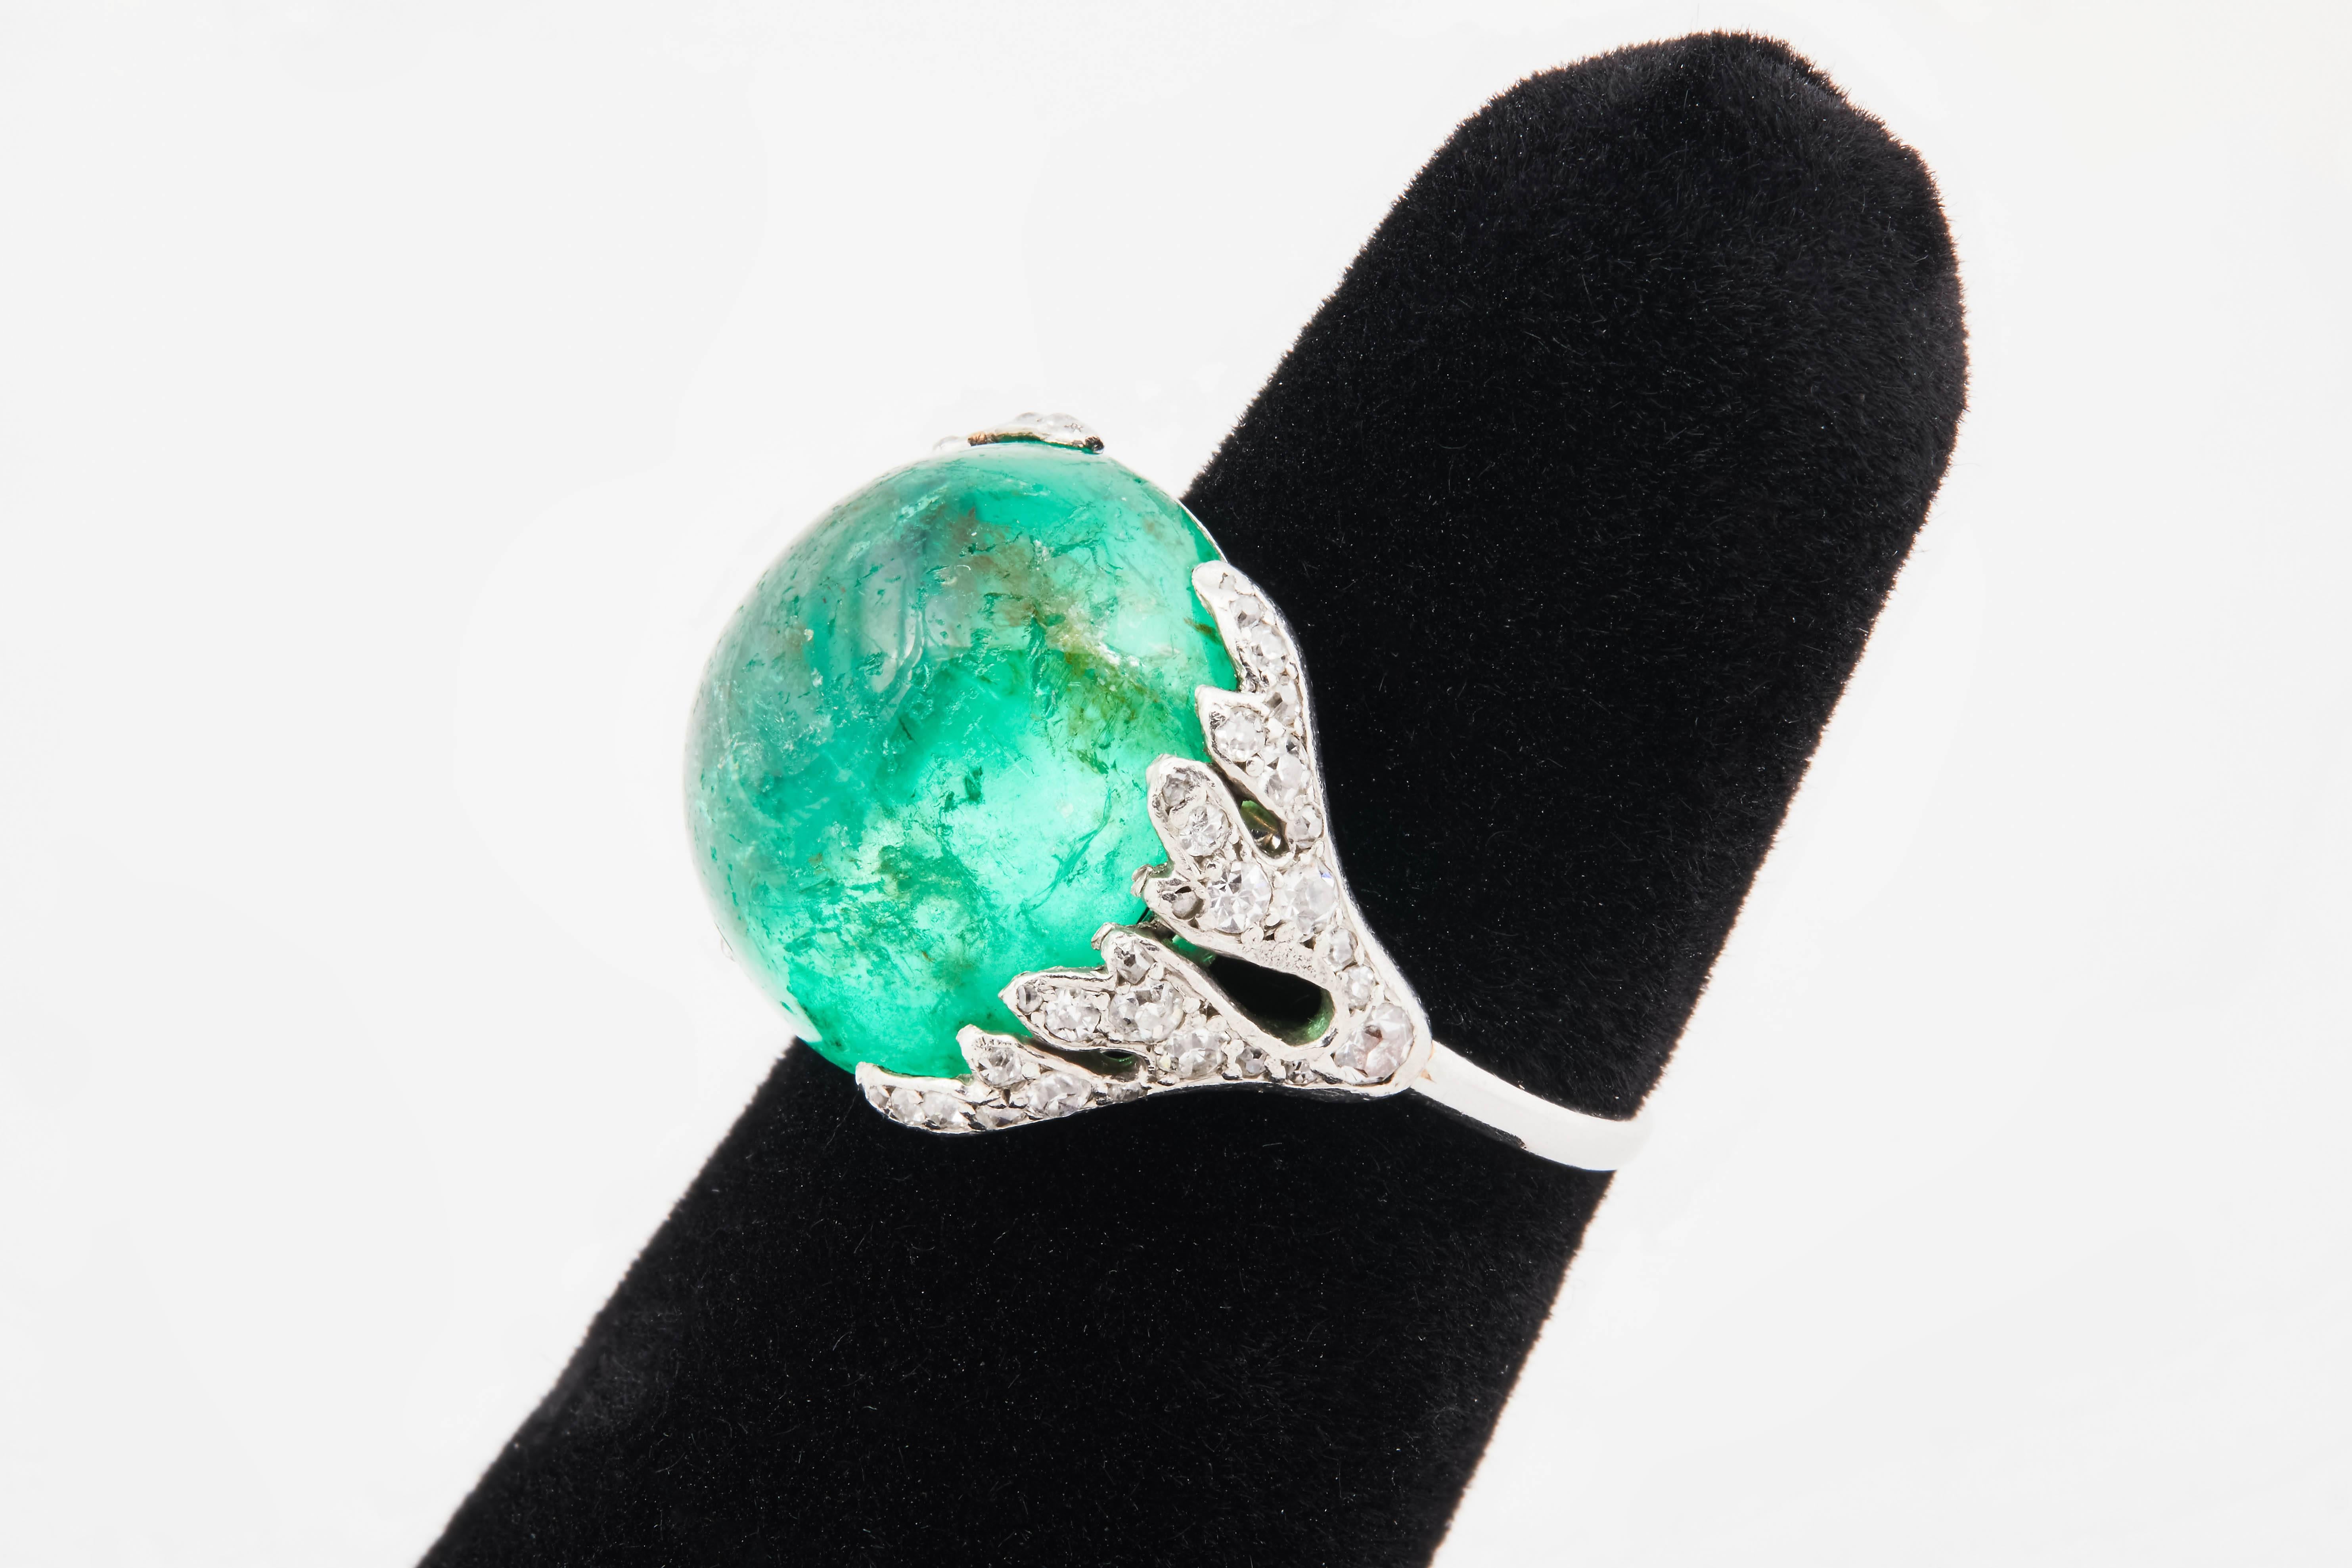 Platinum ring with 14.6ct cabochon emerald and 46 round, single-cut diamonds weighting approximately 9.50ct. Circa 1920s. Size 5.5.